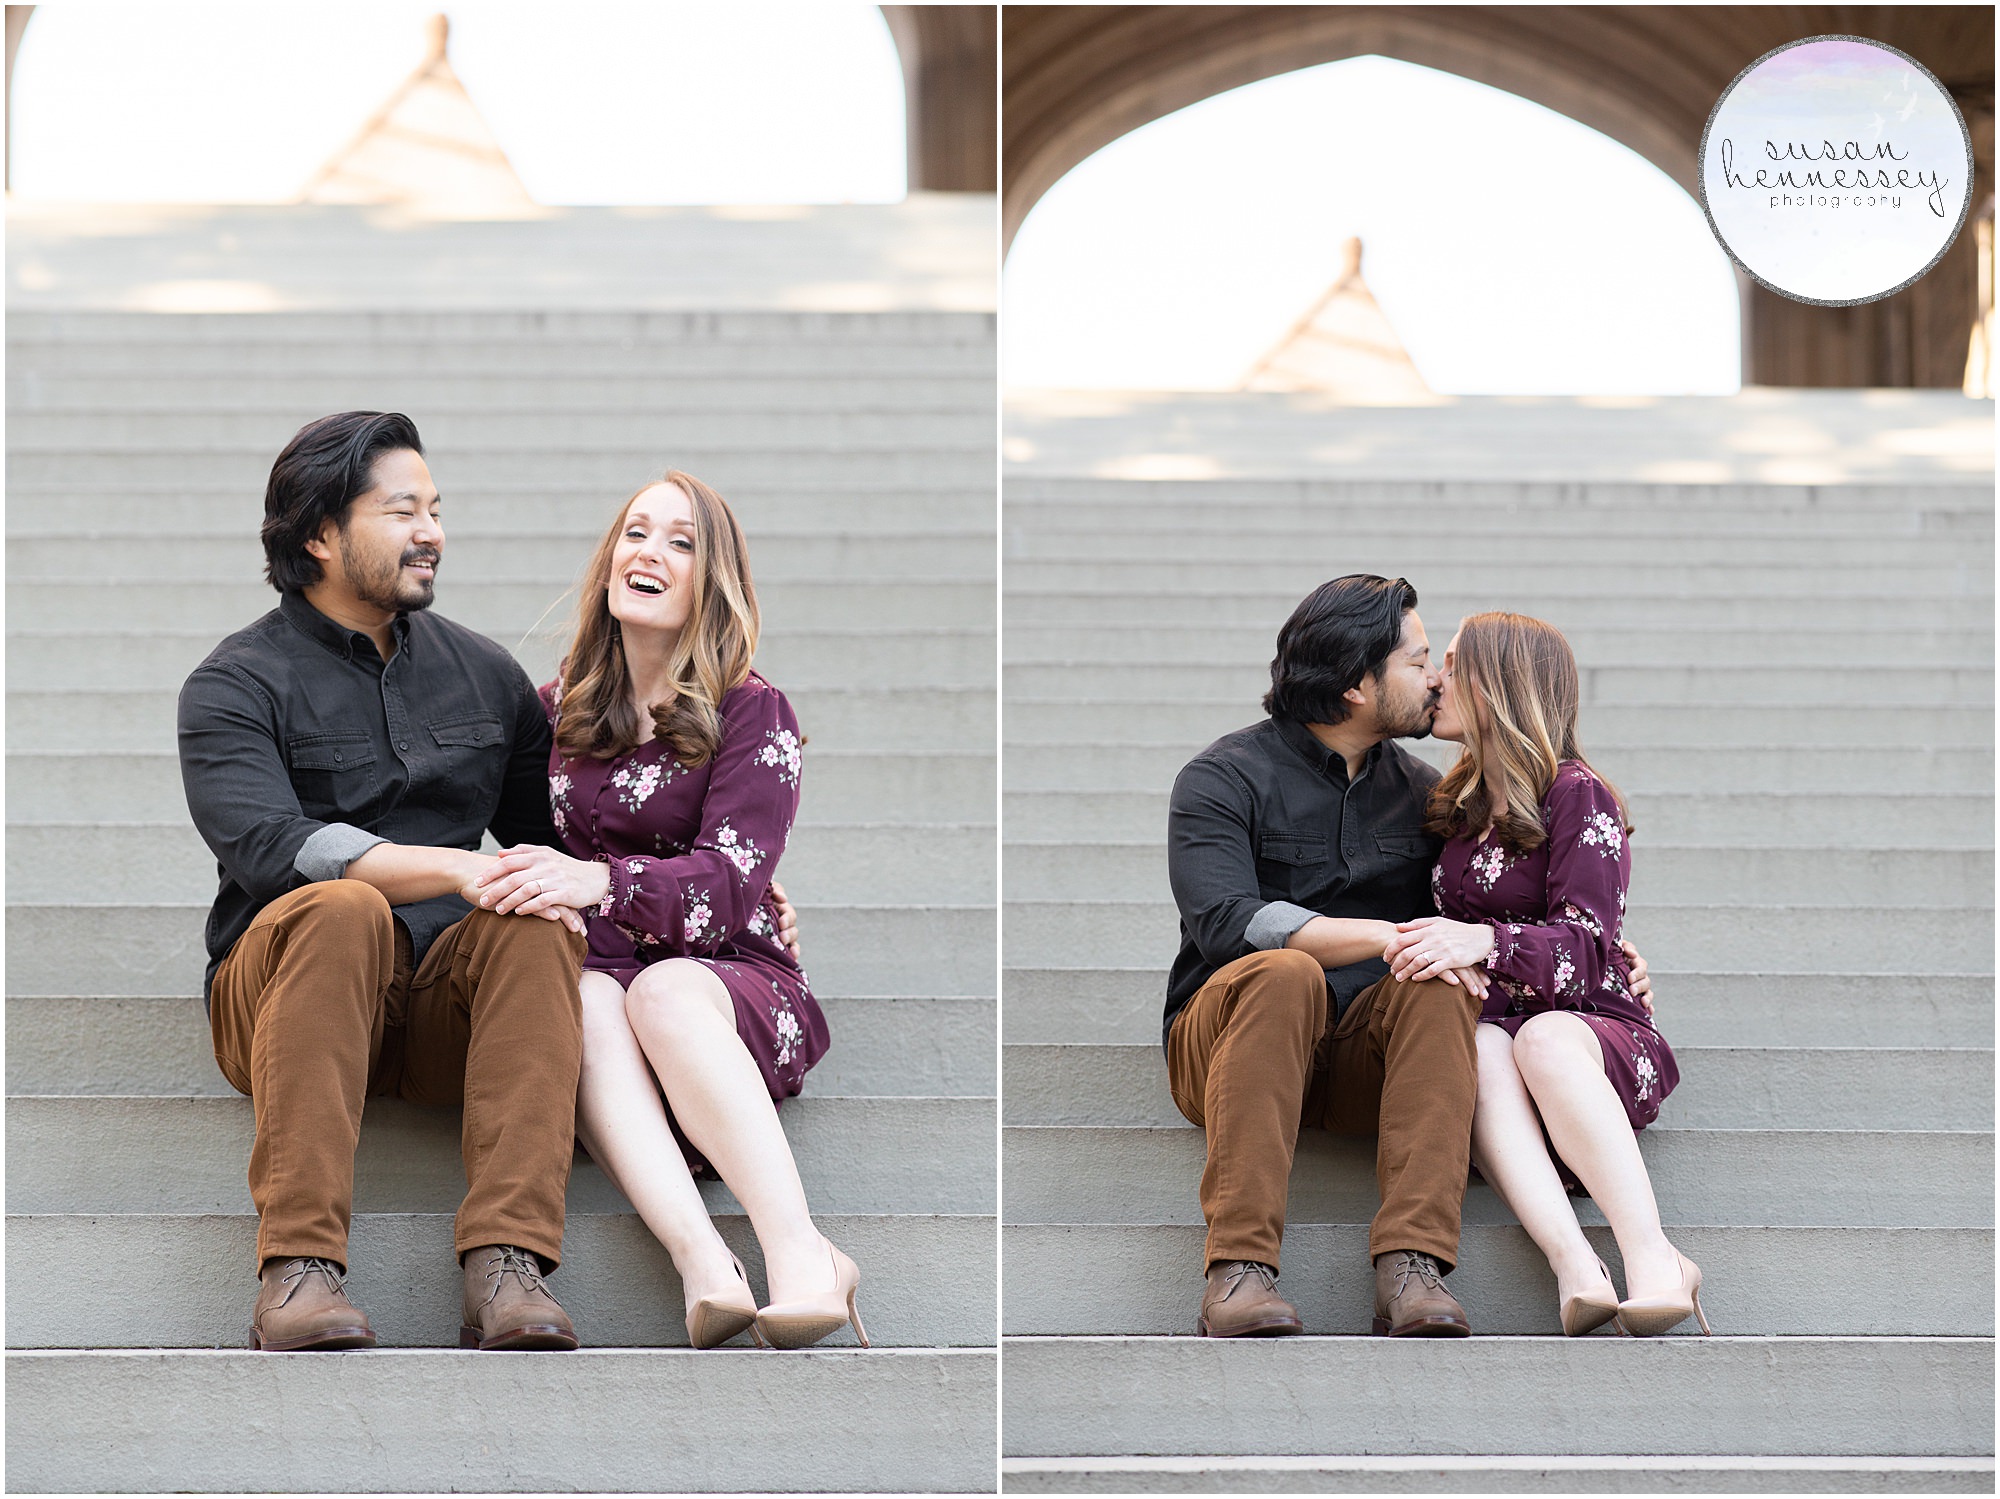 An engaged couple sits on the stairs at Princeton University